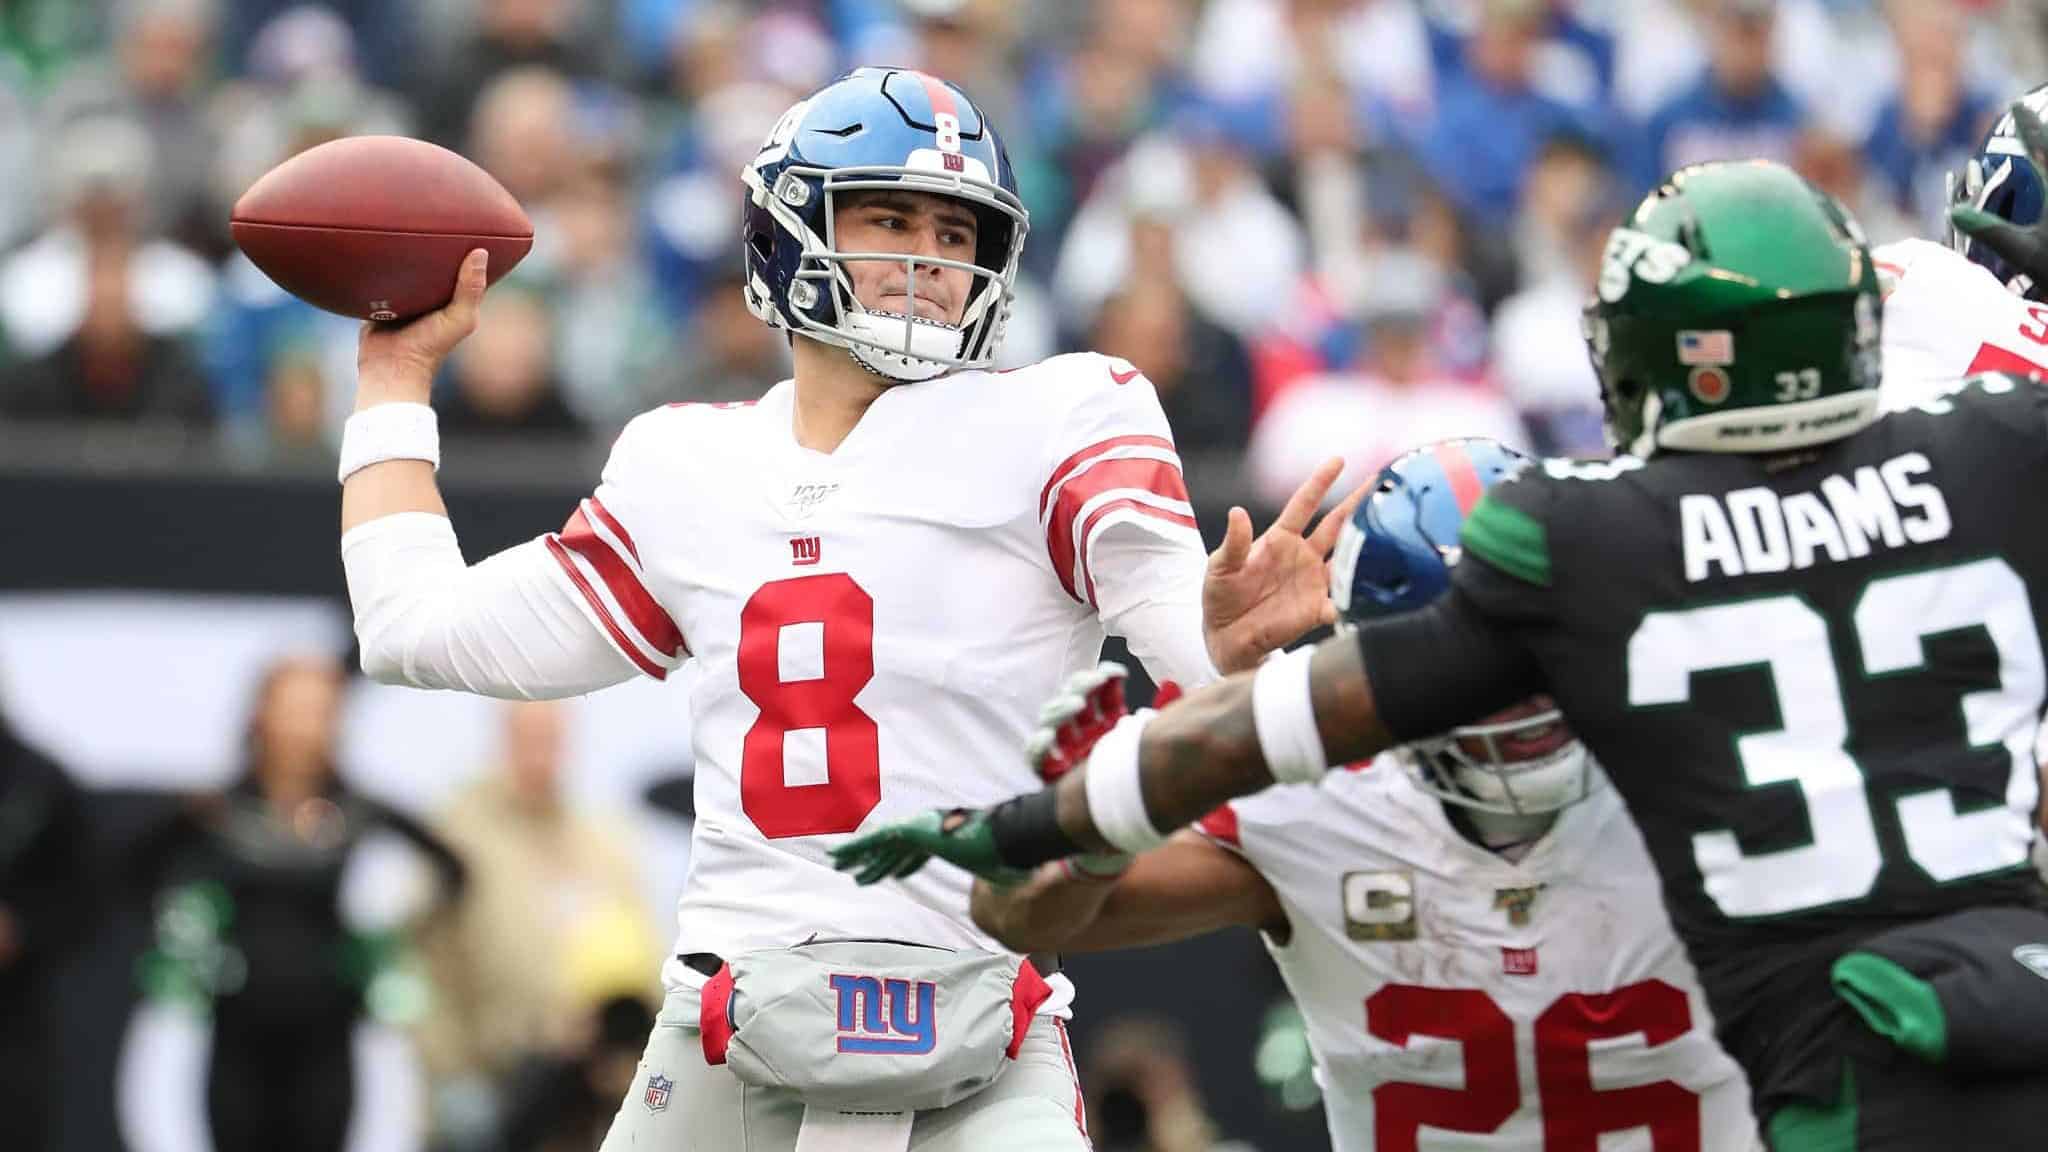 EAST RUTHERFORD, NEW JERSEY - NOVEMBER 10: Daniel Jones #8 of the New York Giants passes against the New York Jets during their game at MetLife Stadium on November 10, 2019 in East Rutherford, New Jersey.